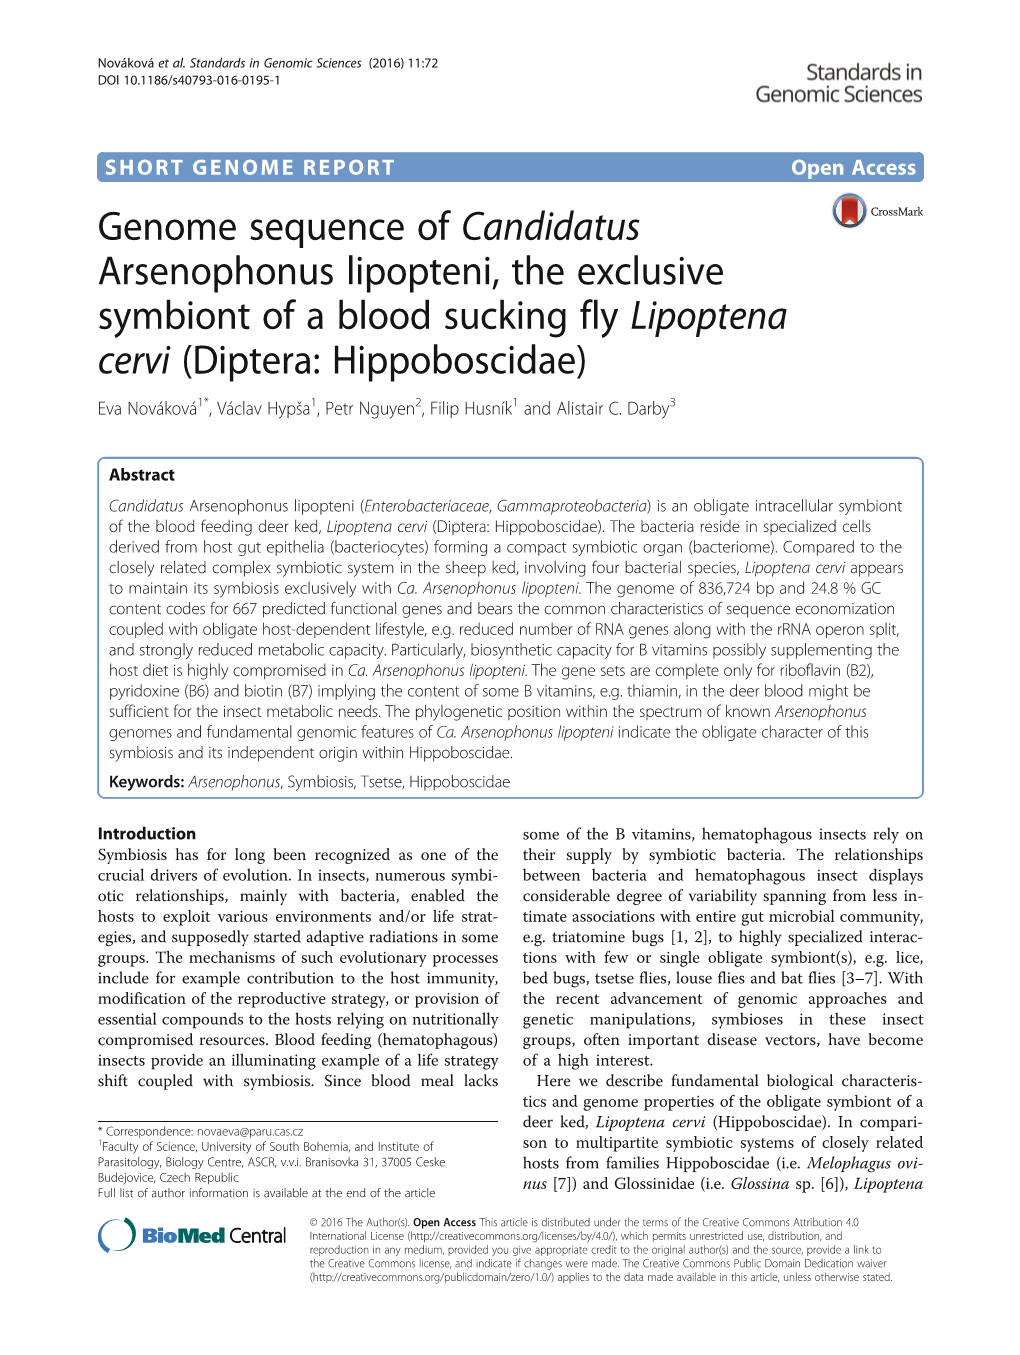 Genome Sequence of Candidatus Arsenophonus Lipopteni, the Exclusive Symbiont of a Blood Sucking Fly Lipoptena Cervi (Diptera: Hi